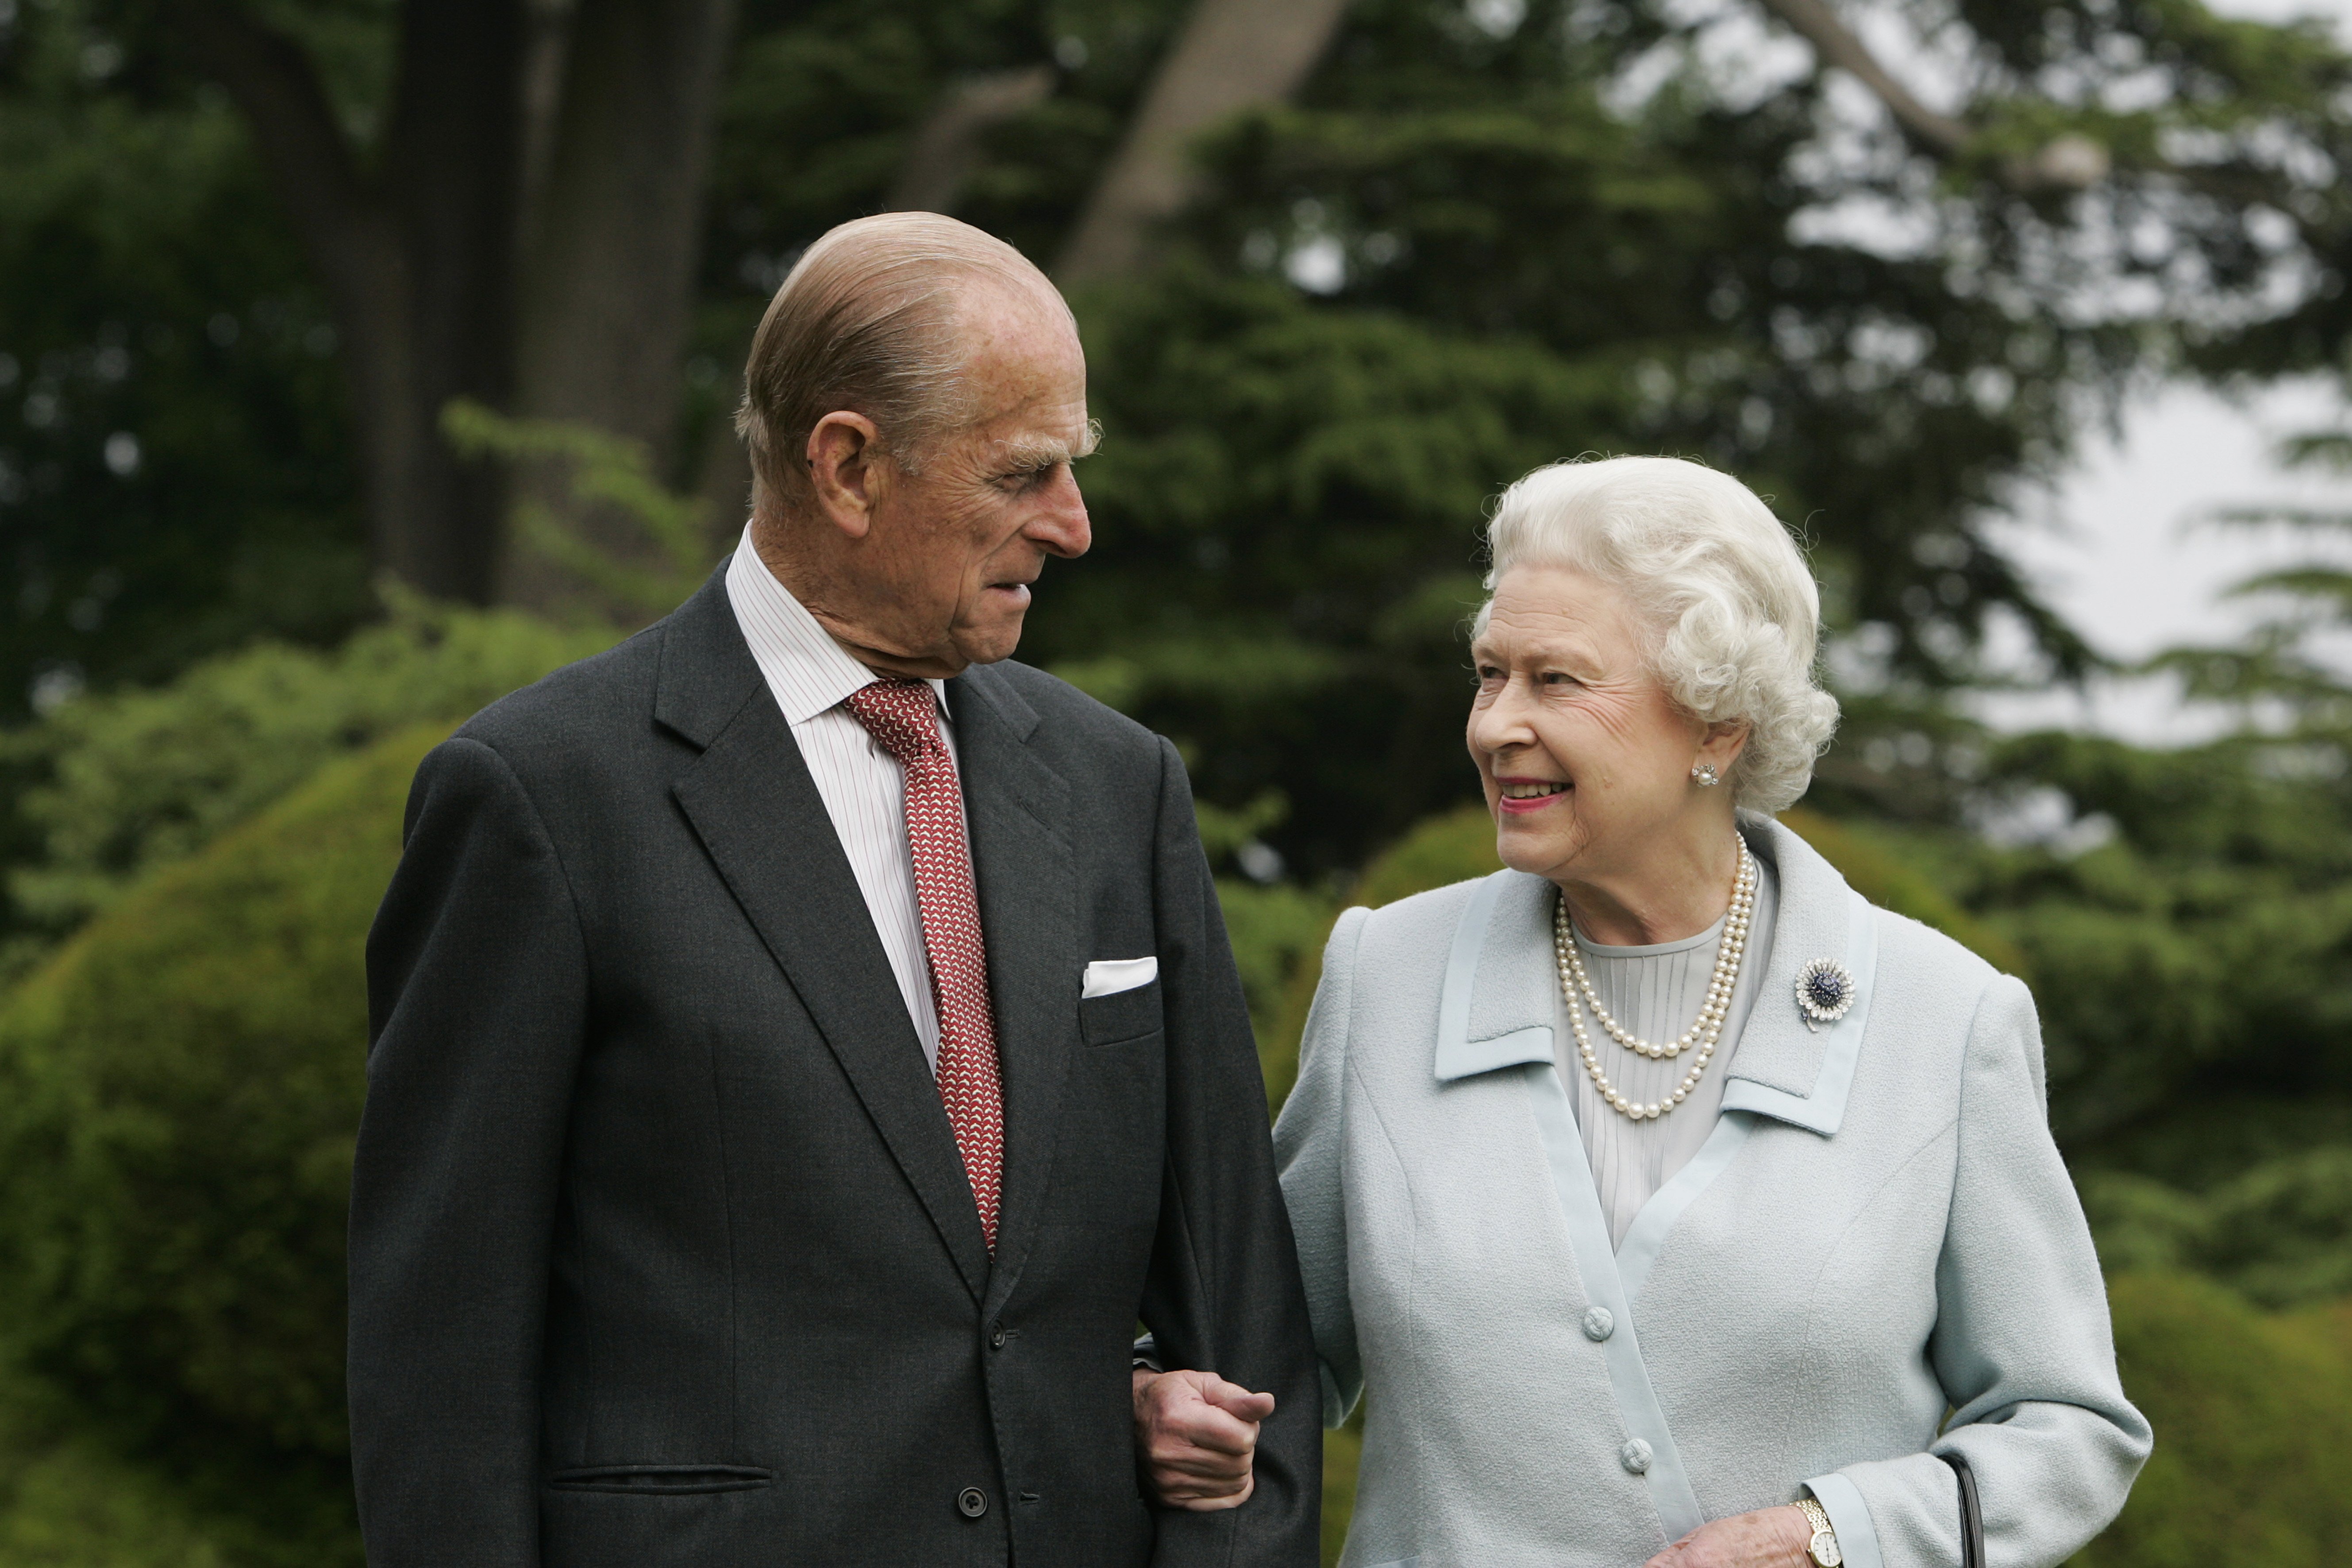 The Queen Elizabeth II and Prince Philip, The Duke of Edinburgh re-visit Broadlands, to mark their Diamond Wedding Anniversary on November 20. | Source: Tim Graham/Getty Images